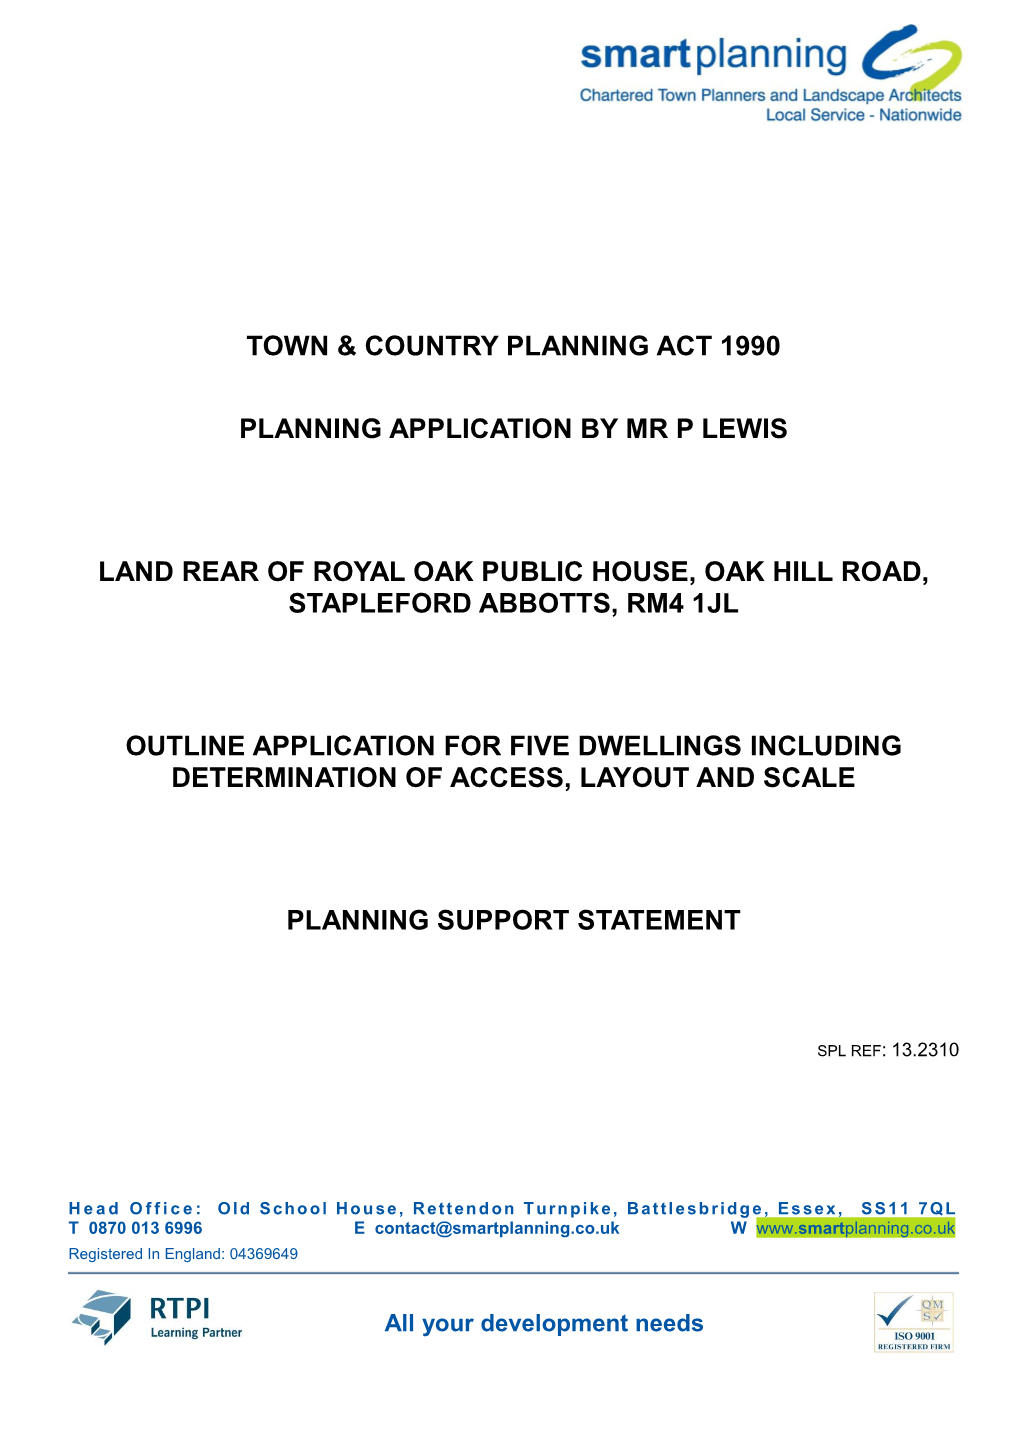 Town & Country Planning Act 1990